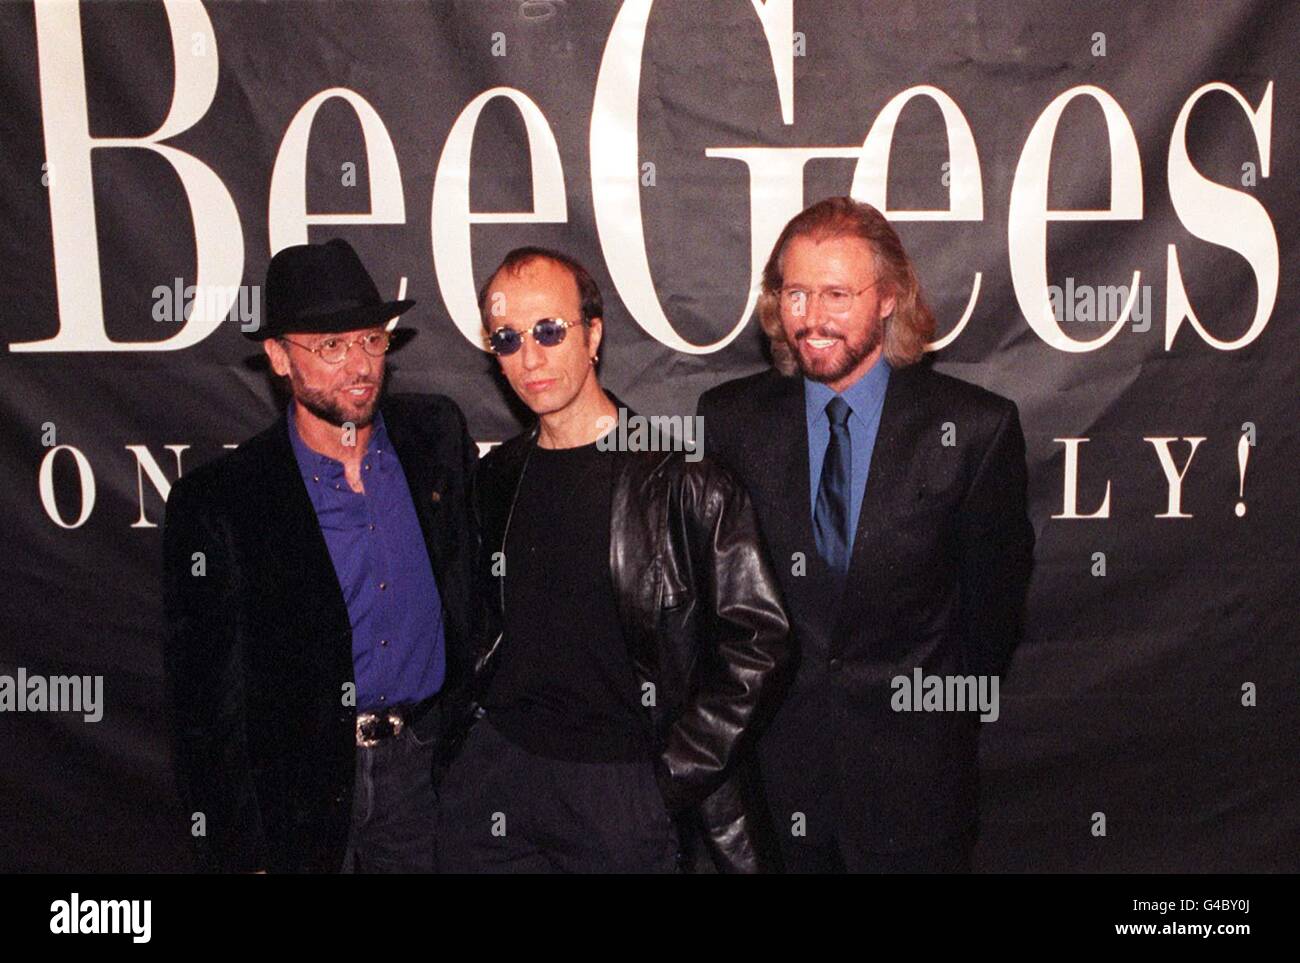 The Bee Gess (from left) Maurice, Robin and Barry Gibb pose for the media during a photocall at London's Cafe Royal today (Tuesday) where they unveiled plans for a leisurely world tour, 31 years after their first hit. Photo by Andrew Stuart/PA. See PA story SHOWBIZ Bee Gees Stock Photo